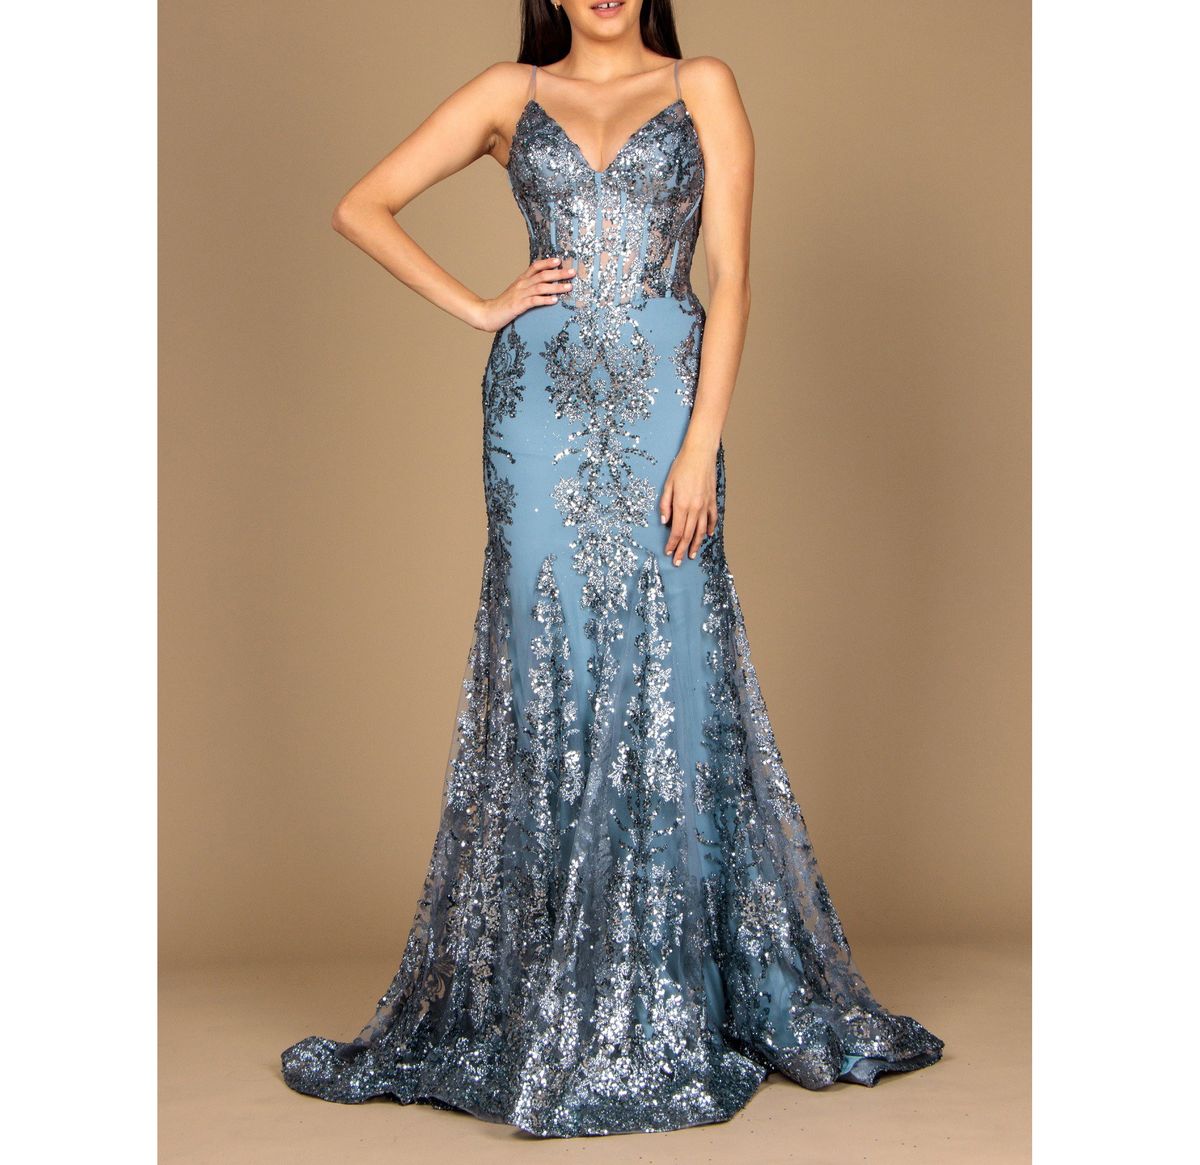 Style Dusty Blue Sequined & Glitter Corset Mermaid Prom Formal Dress  Dylan & David Size 10 Prom Sheer Blue Mermaid Dress on Queenly